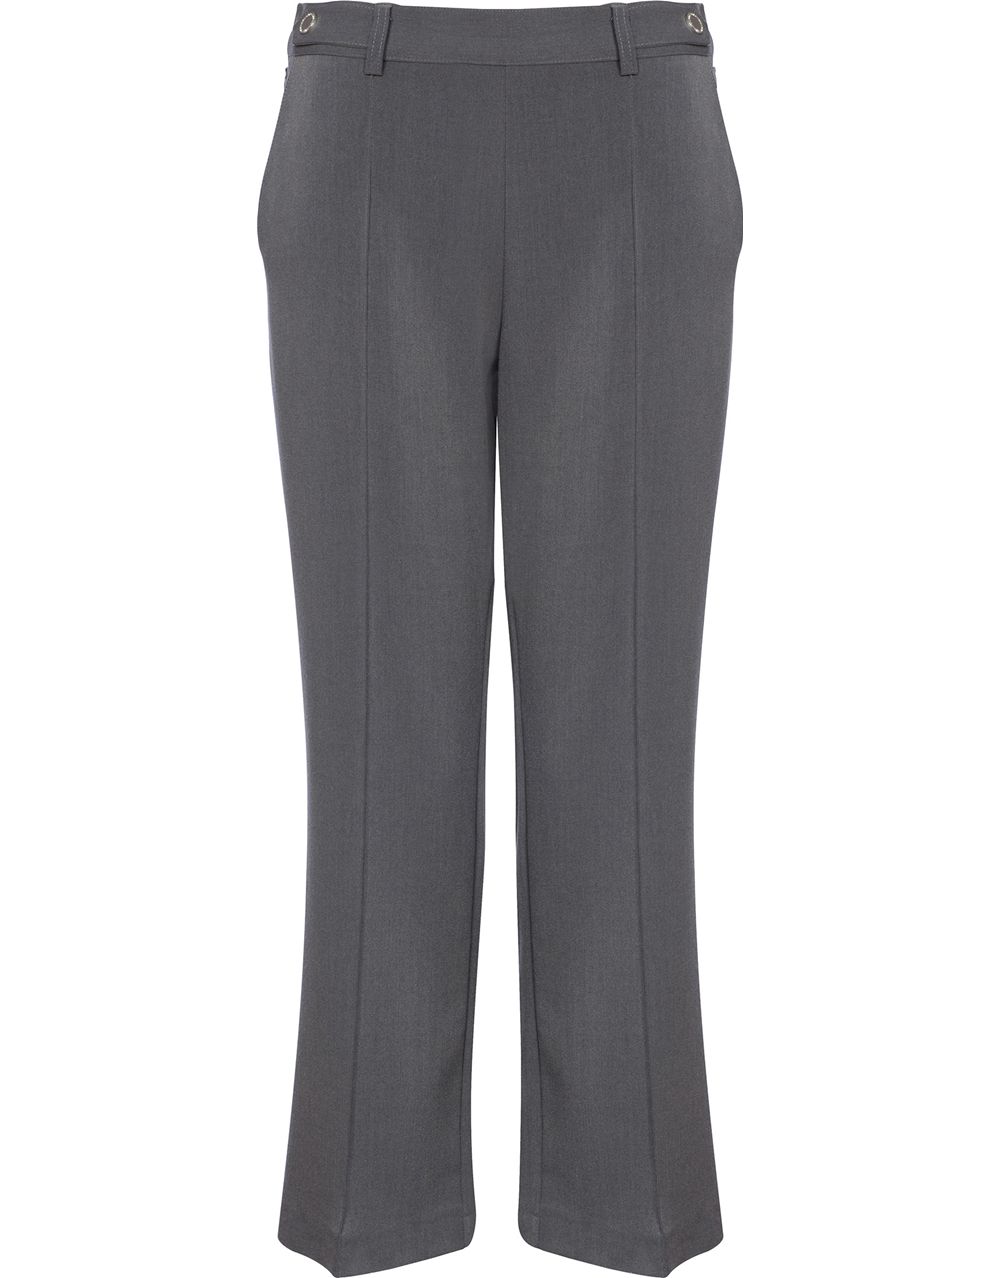 Brands - Anna Rose Anna Rose 27 Inch Straight Leg Trousers Charcoal Women’s